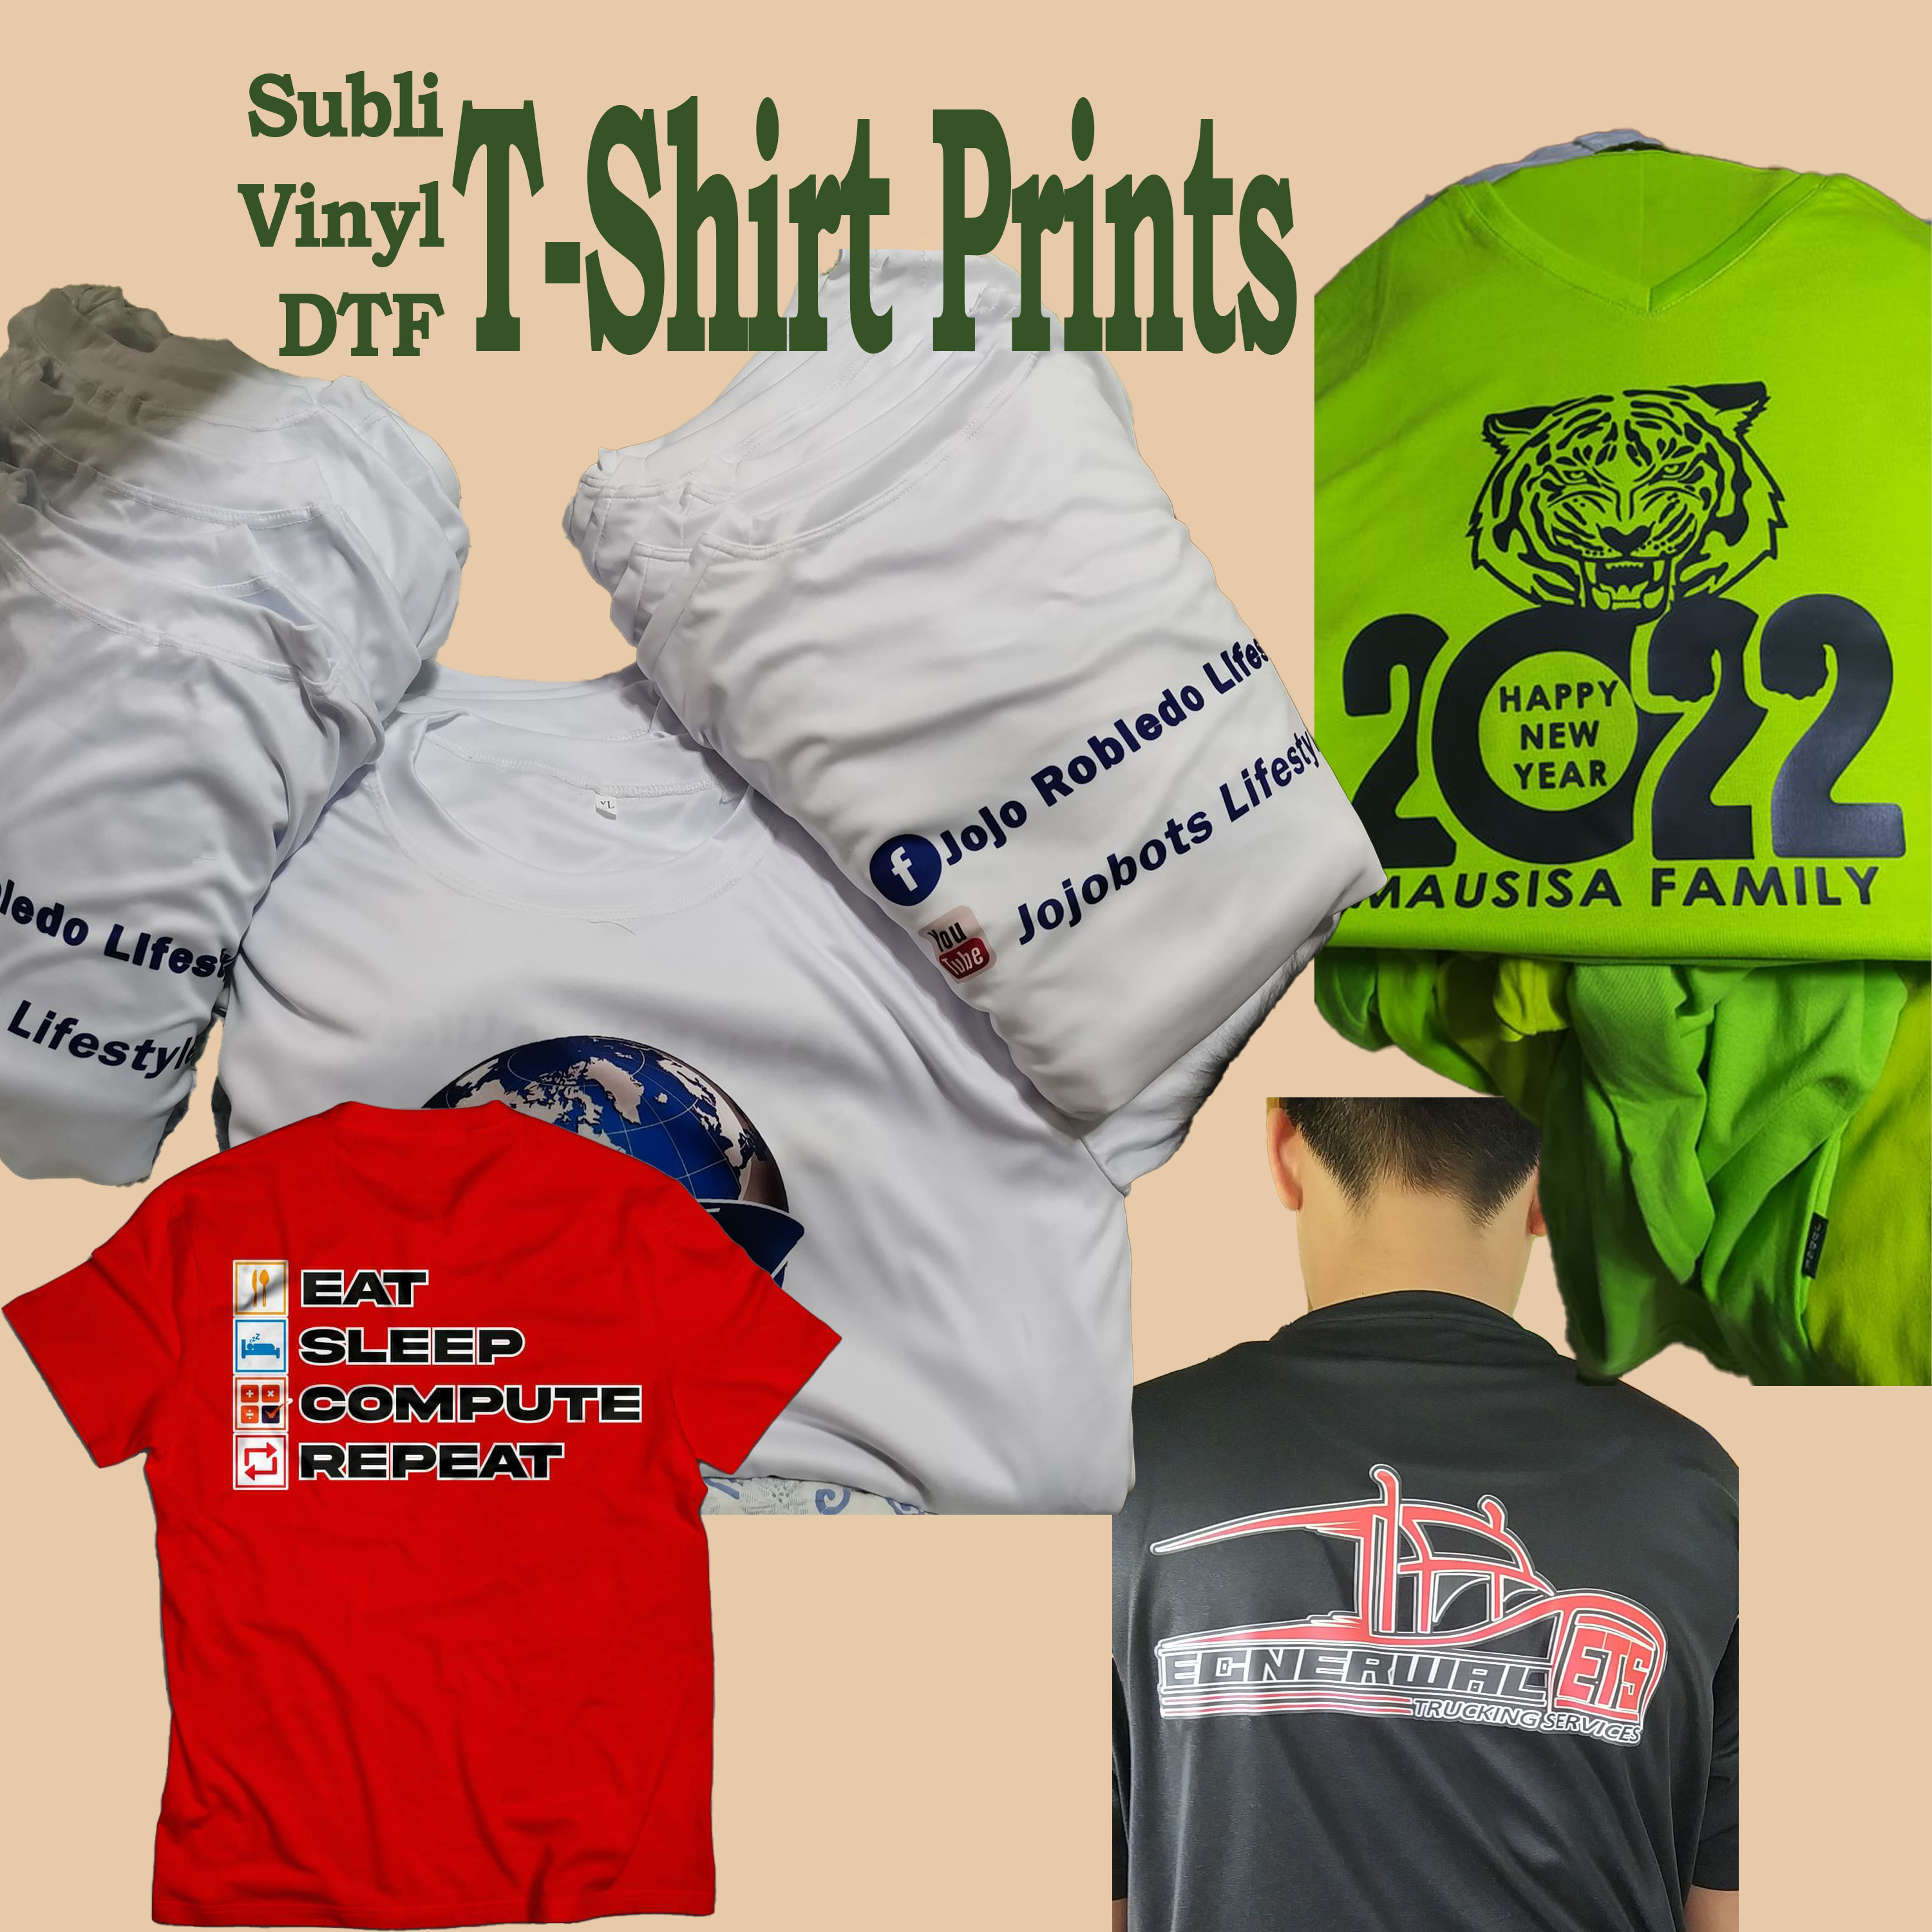 A picture of shirt products